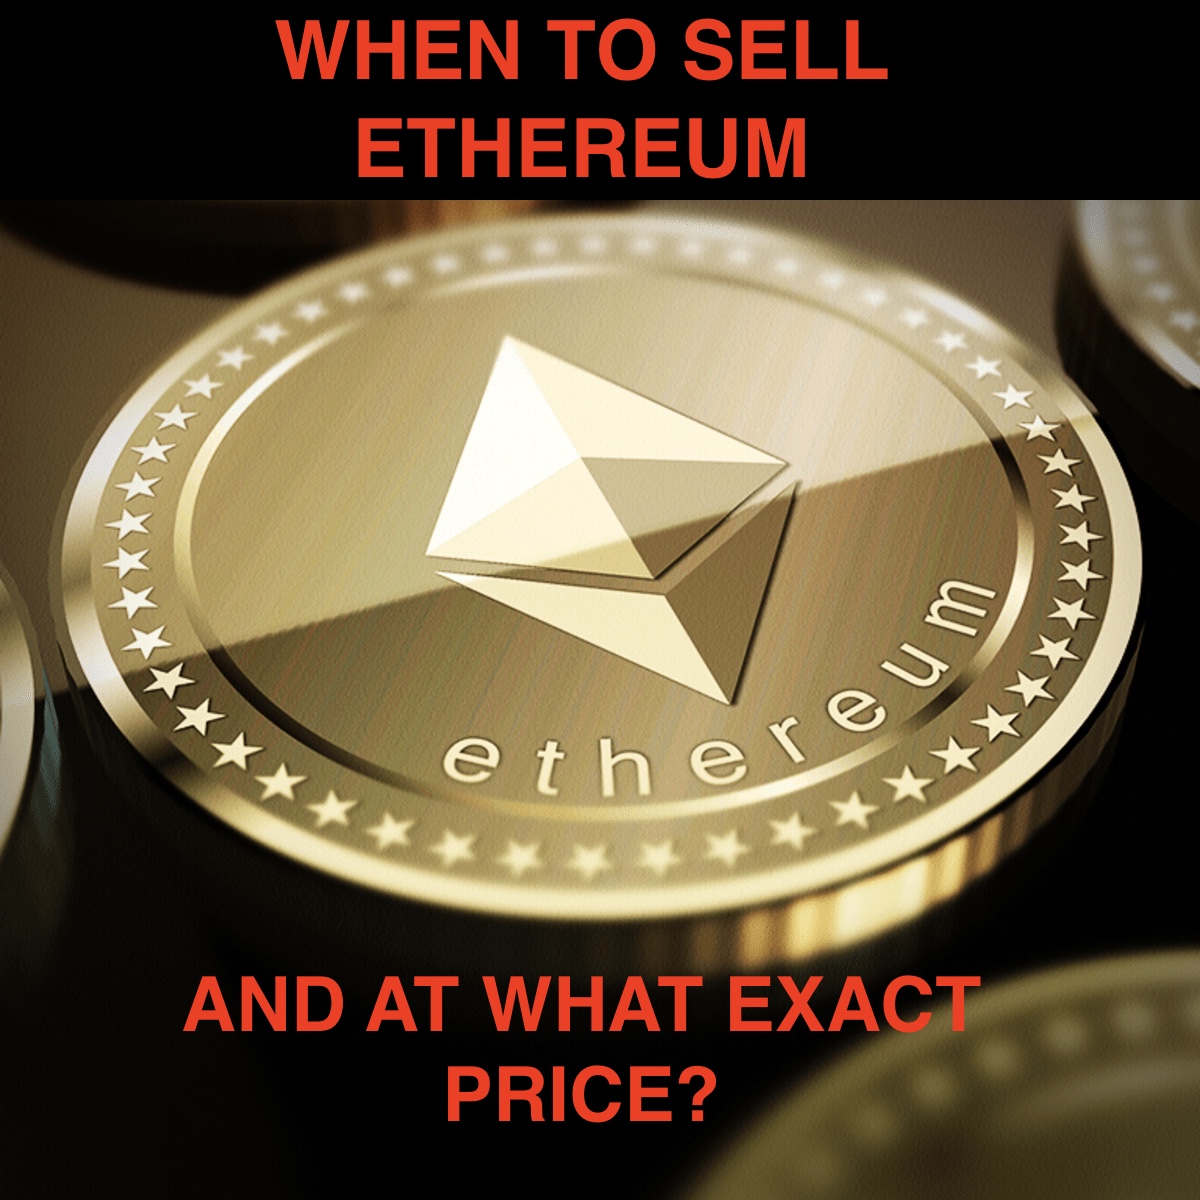 When To Sell ETHEREUM – And At What EXACT PRICE? Easy Way To Decide With May 2021 Two Bob’s Worth